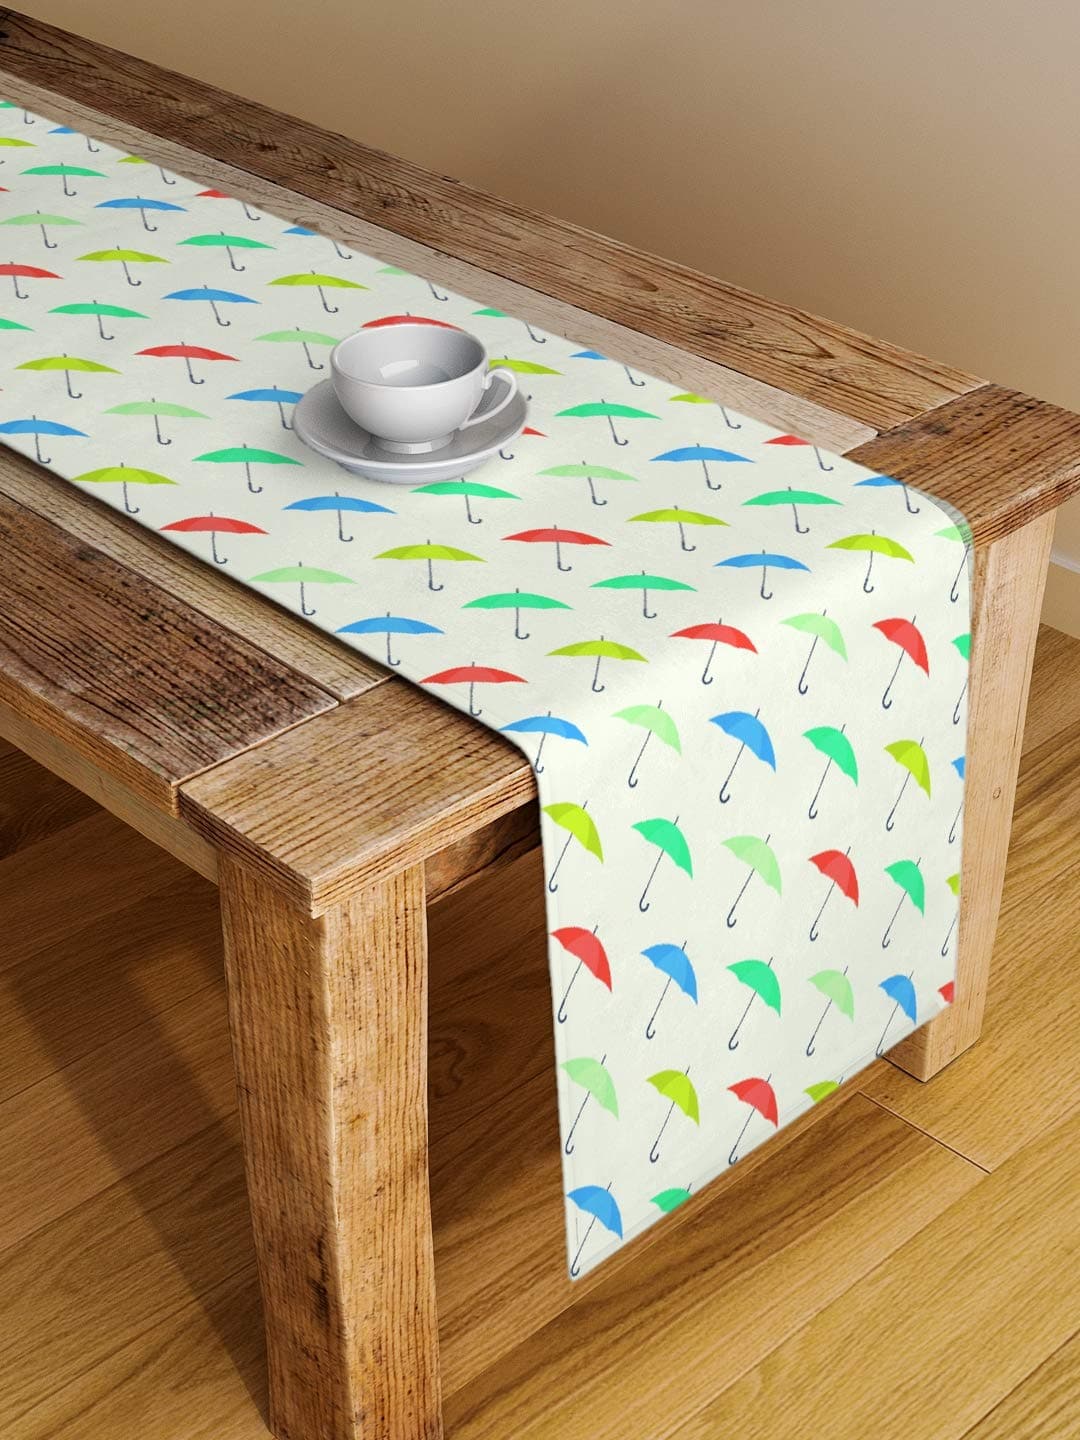 Polycotton Digital Printed Table Runner